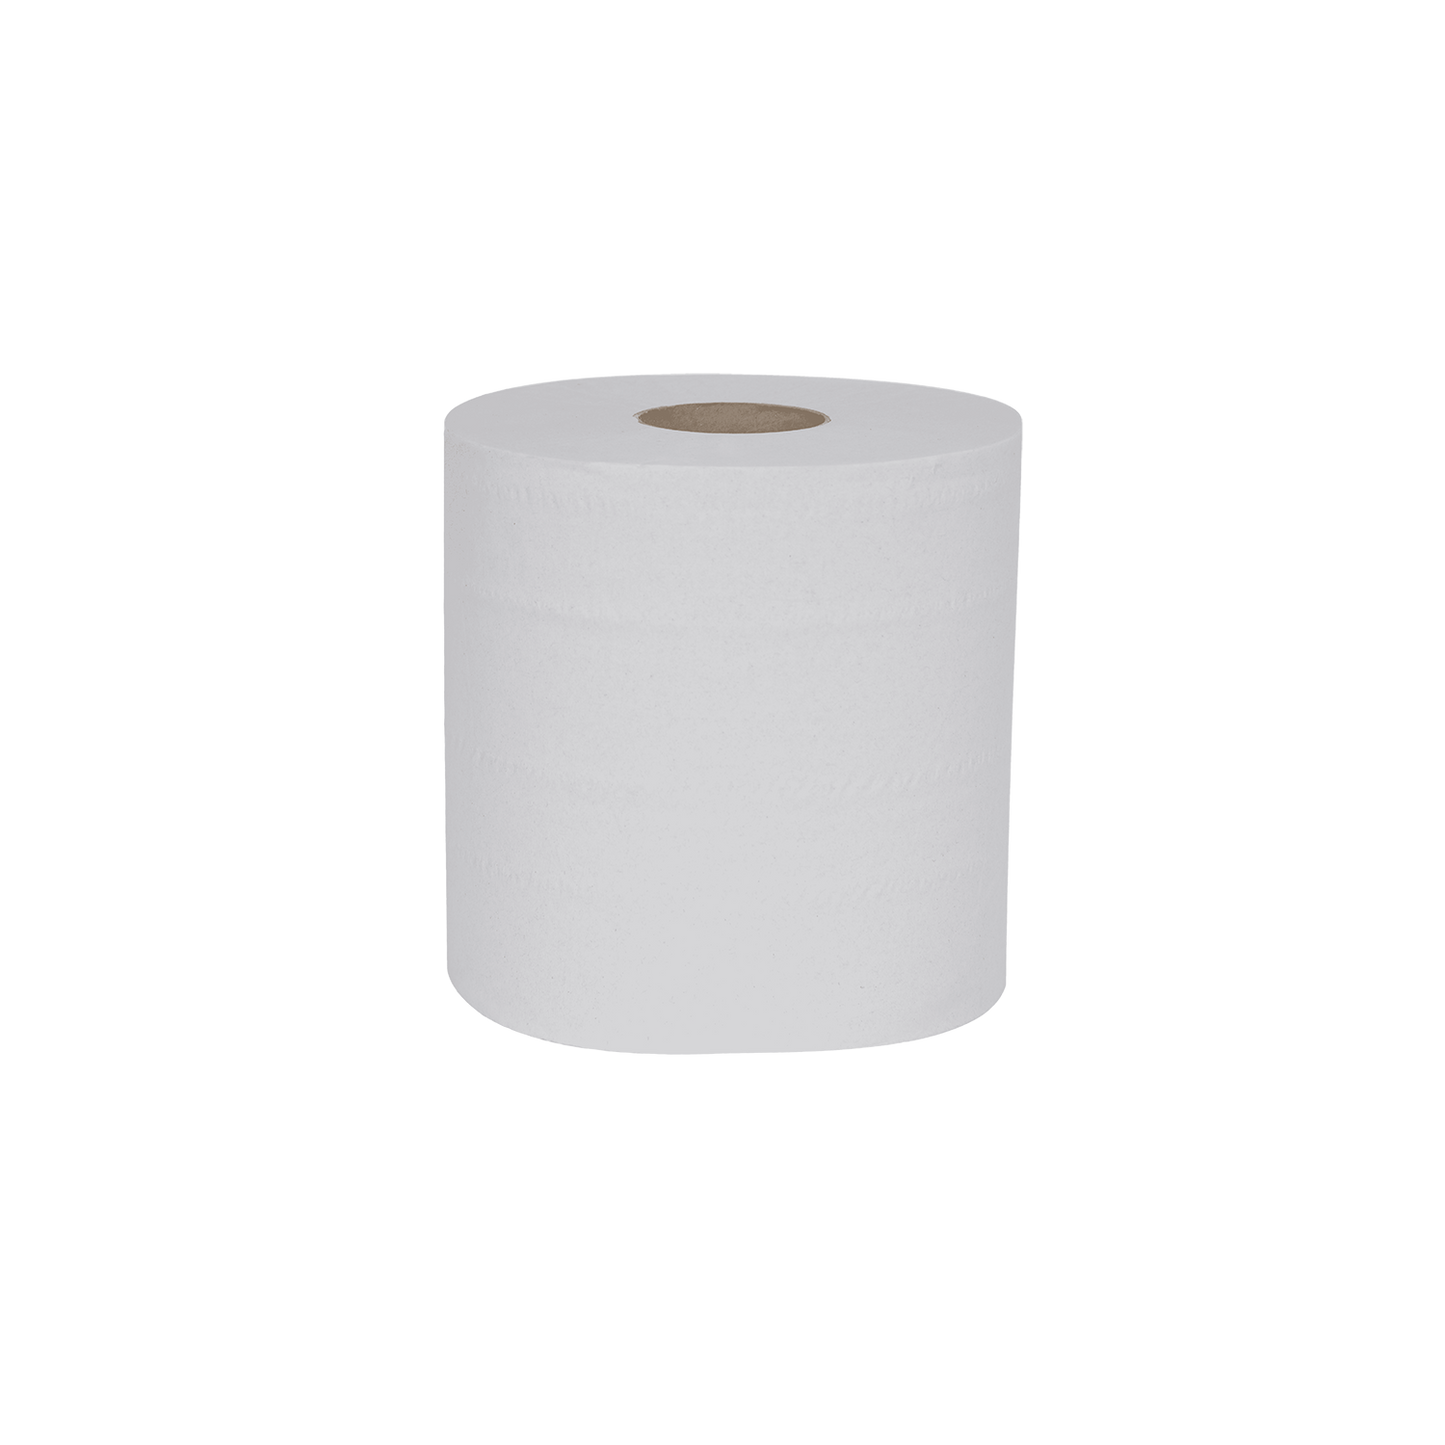 Essentials White Centre Feed 7" - 2ply - 60m x 175mm - Case of 12